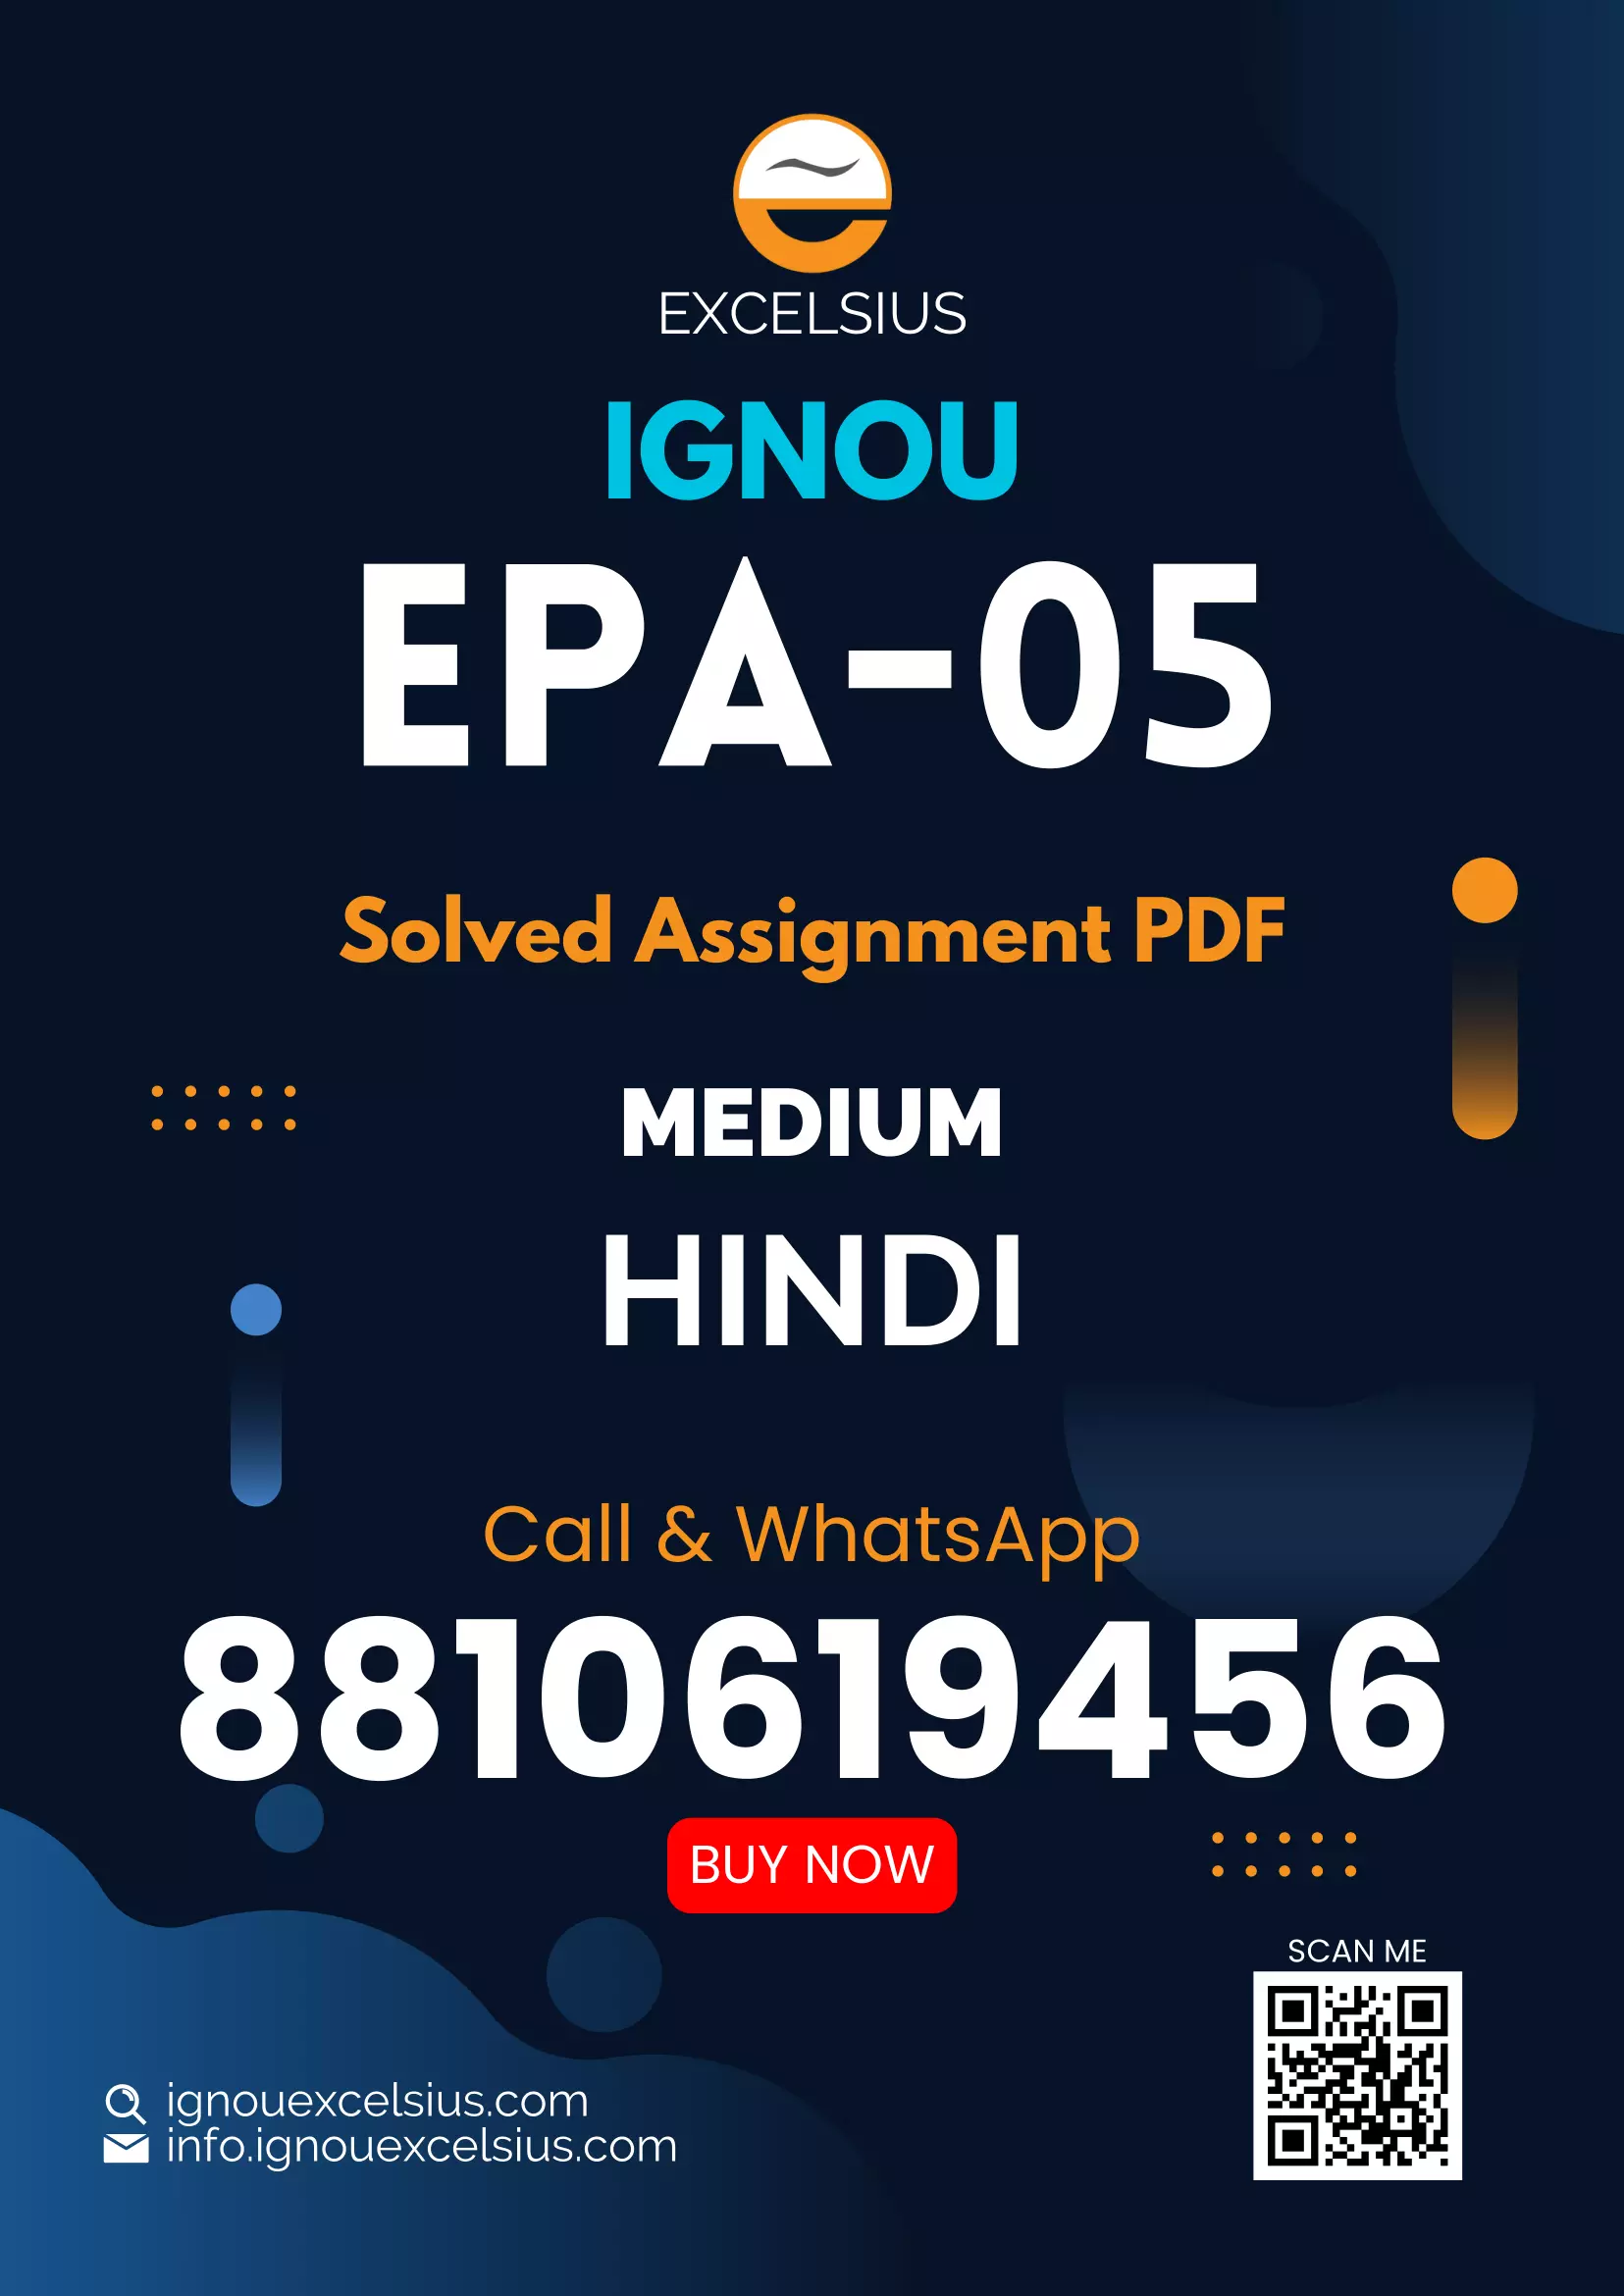 IGNOU EPA-05 - Financial Administration, Latest Solved Assignment-July 2022 - January 2023